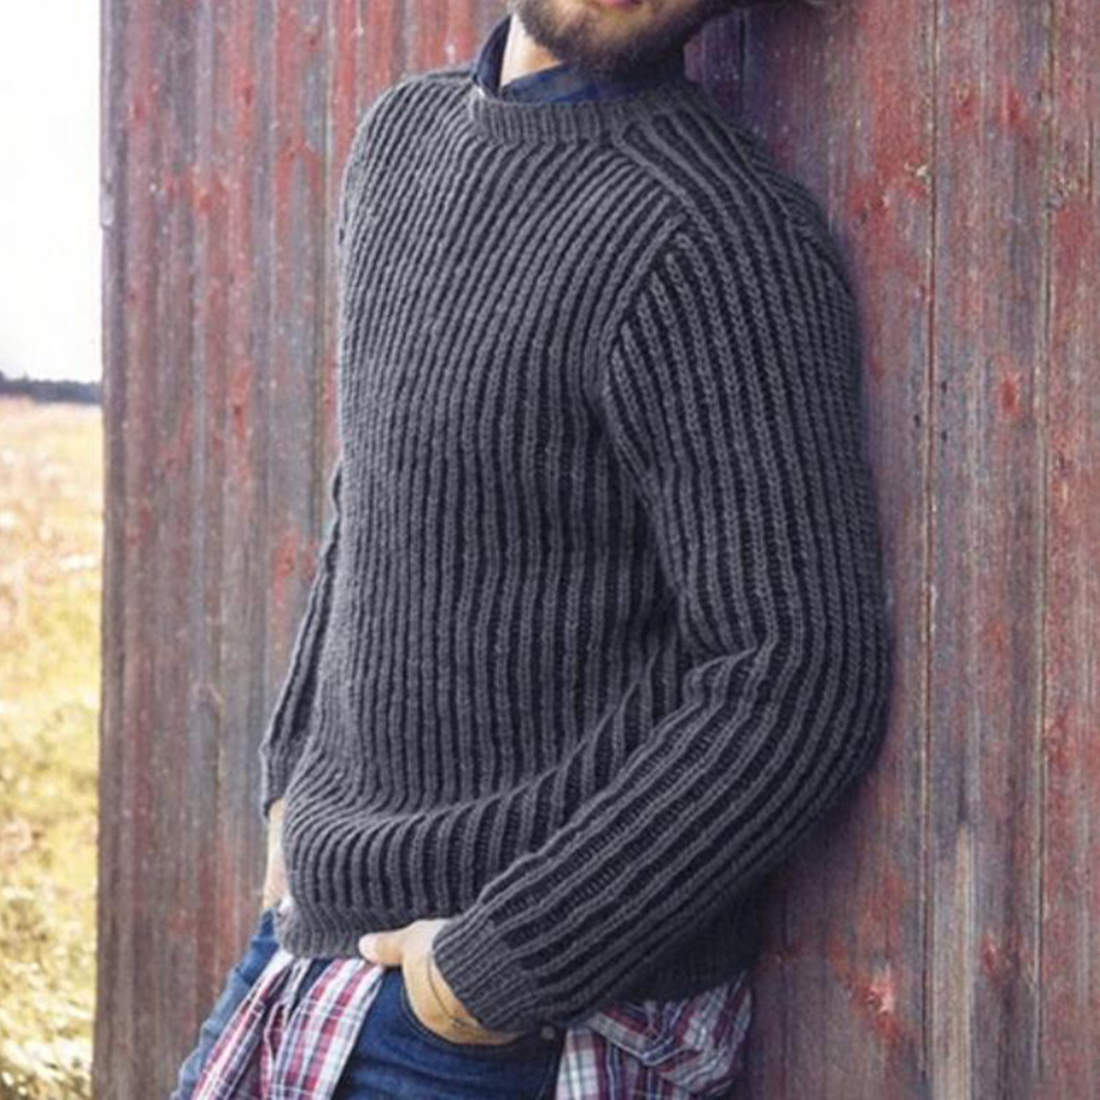 Men's Autumn/Winter Casual Knitted O-Neck Slim Sweater